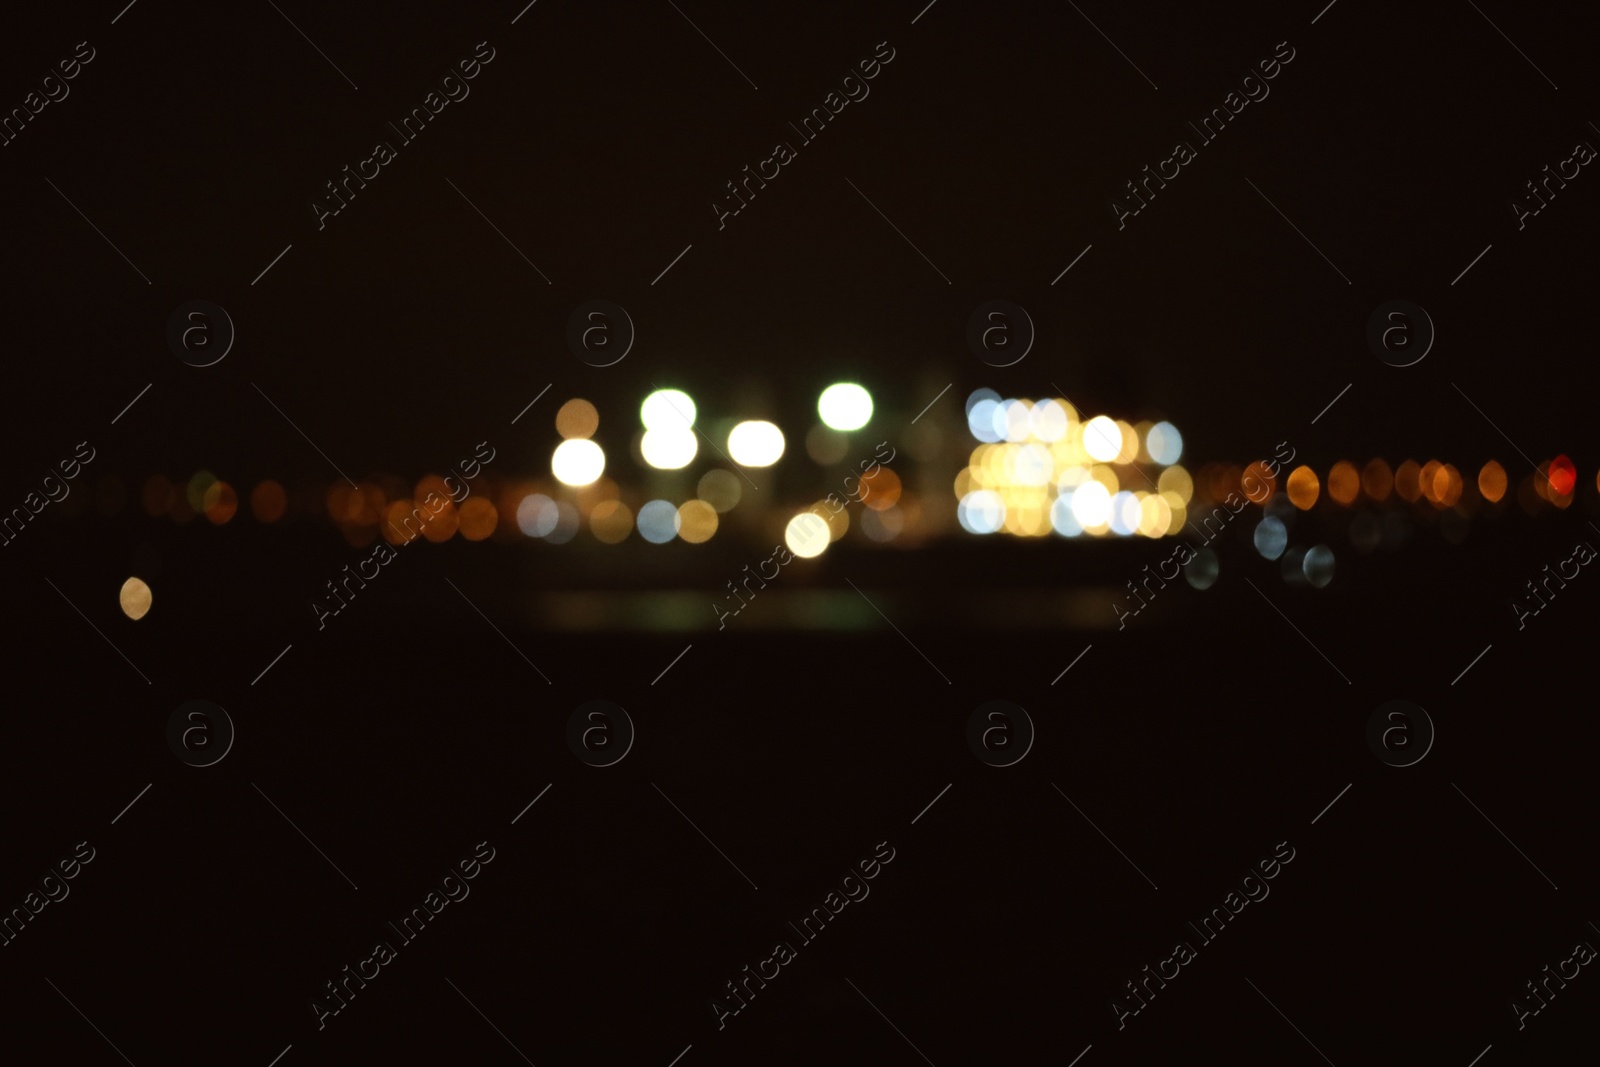 Photo of Blurred view of bulk carrier in roads at night. Bokeh effect